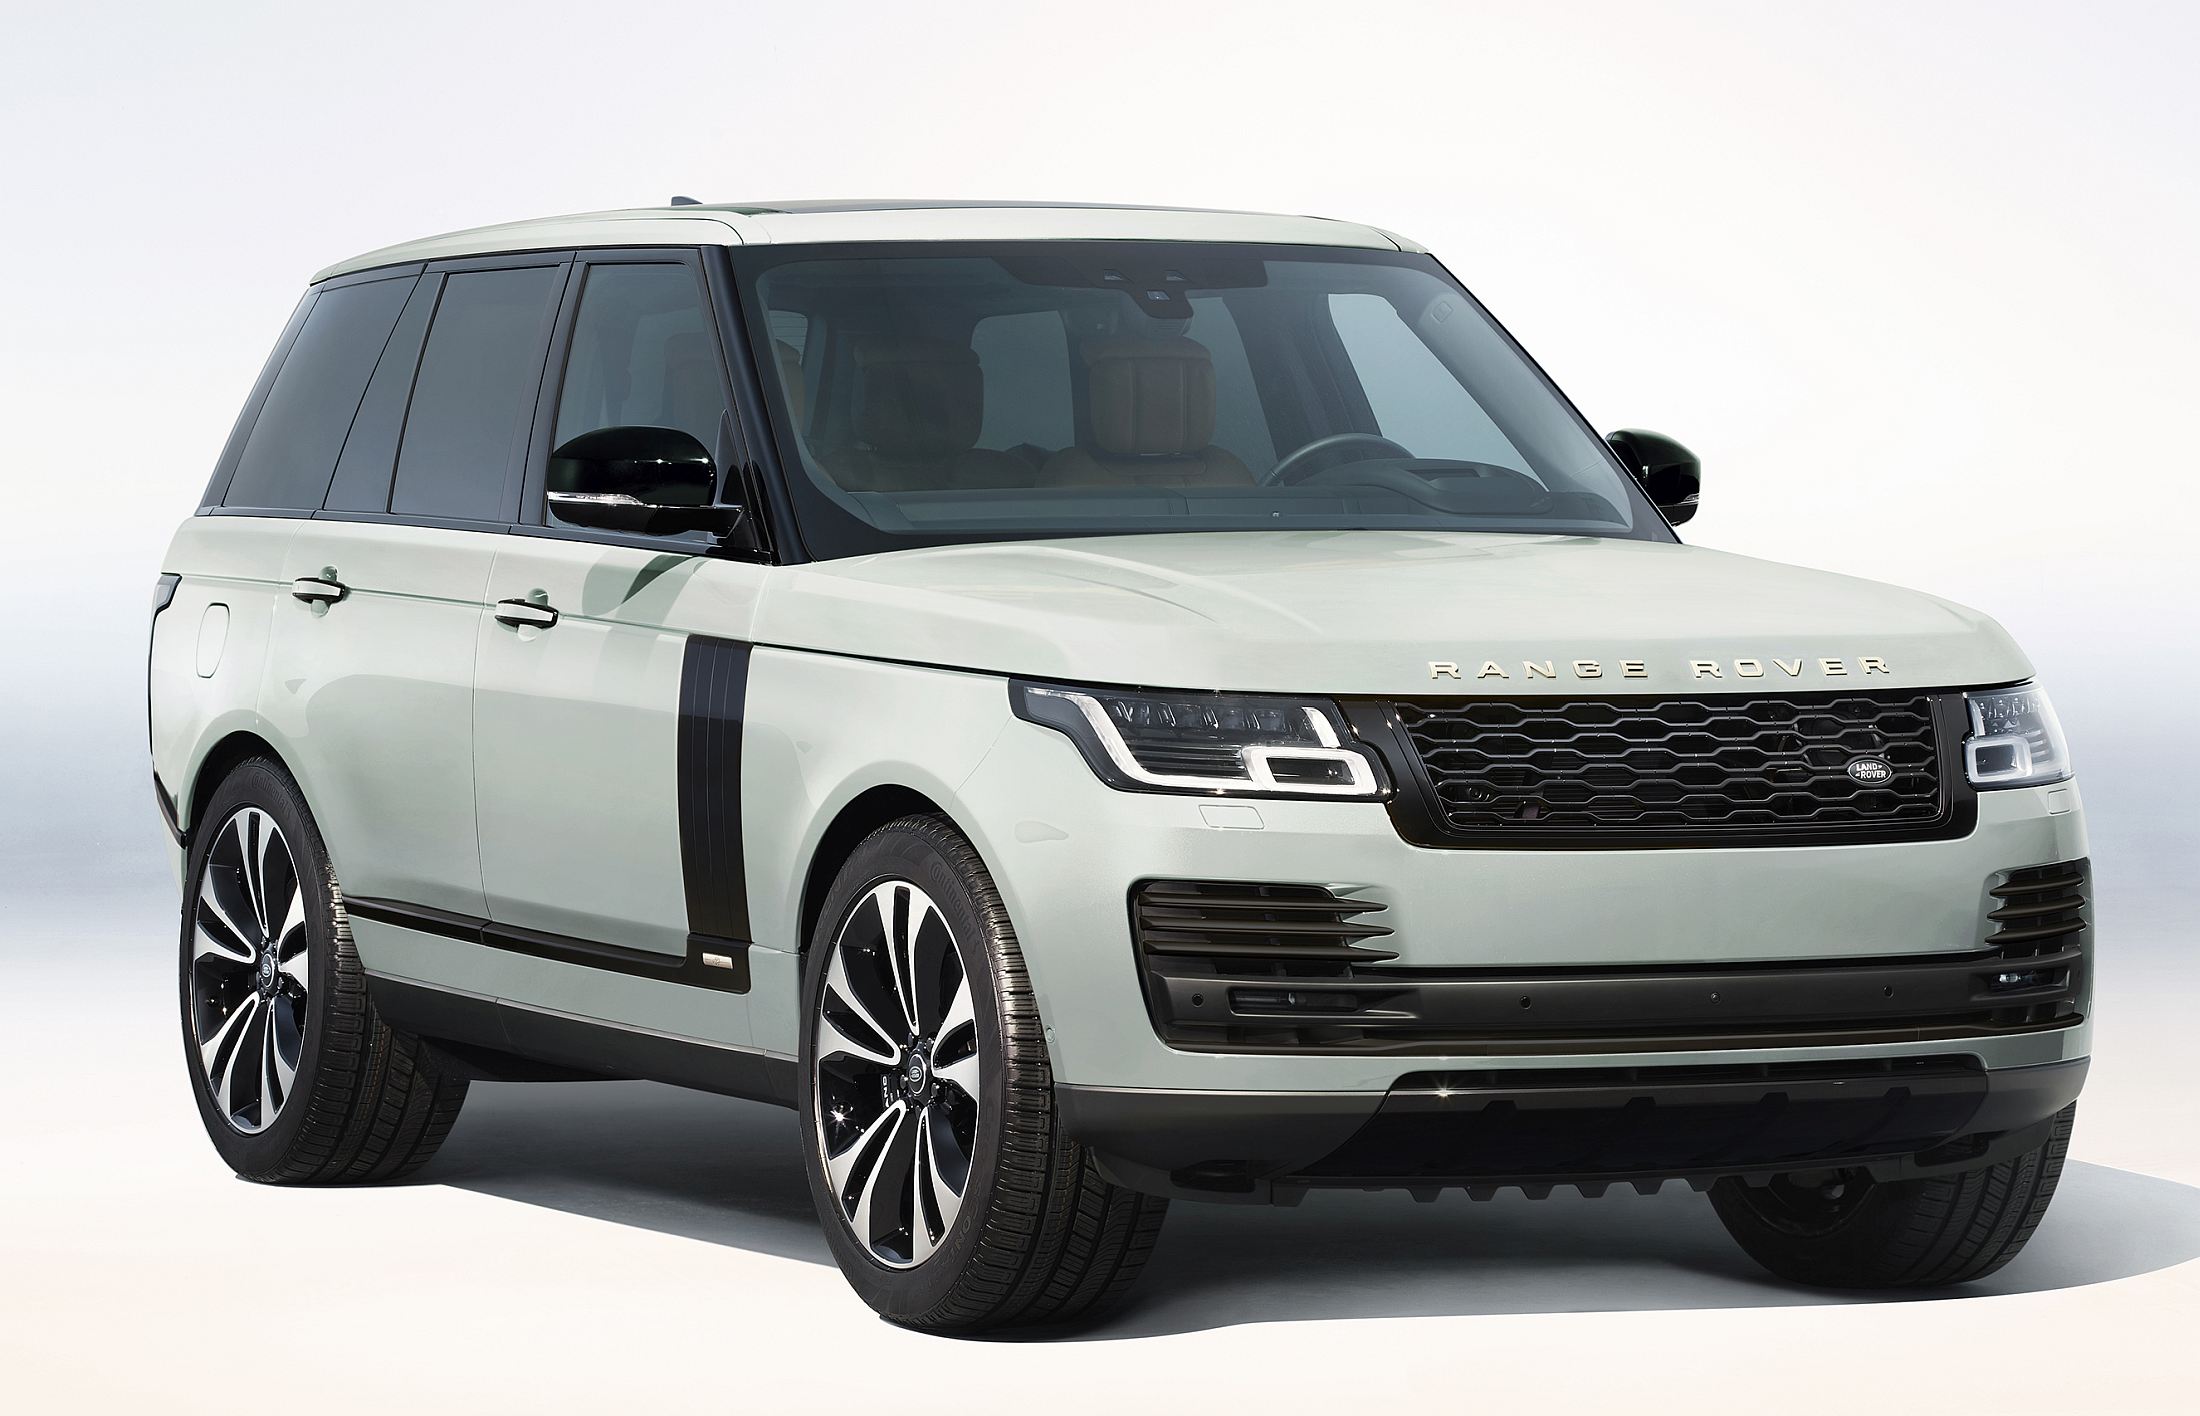 Range Rover_FIFTY_21MY_ND_170620_002 (10)